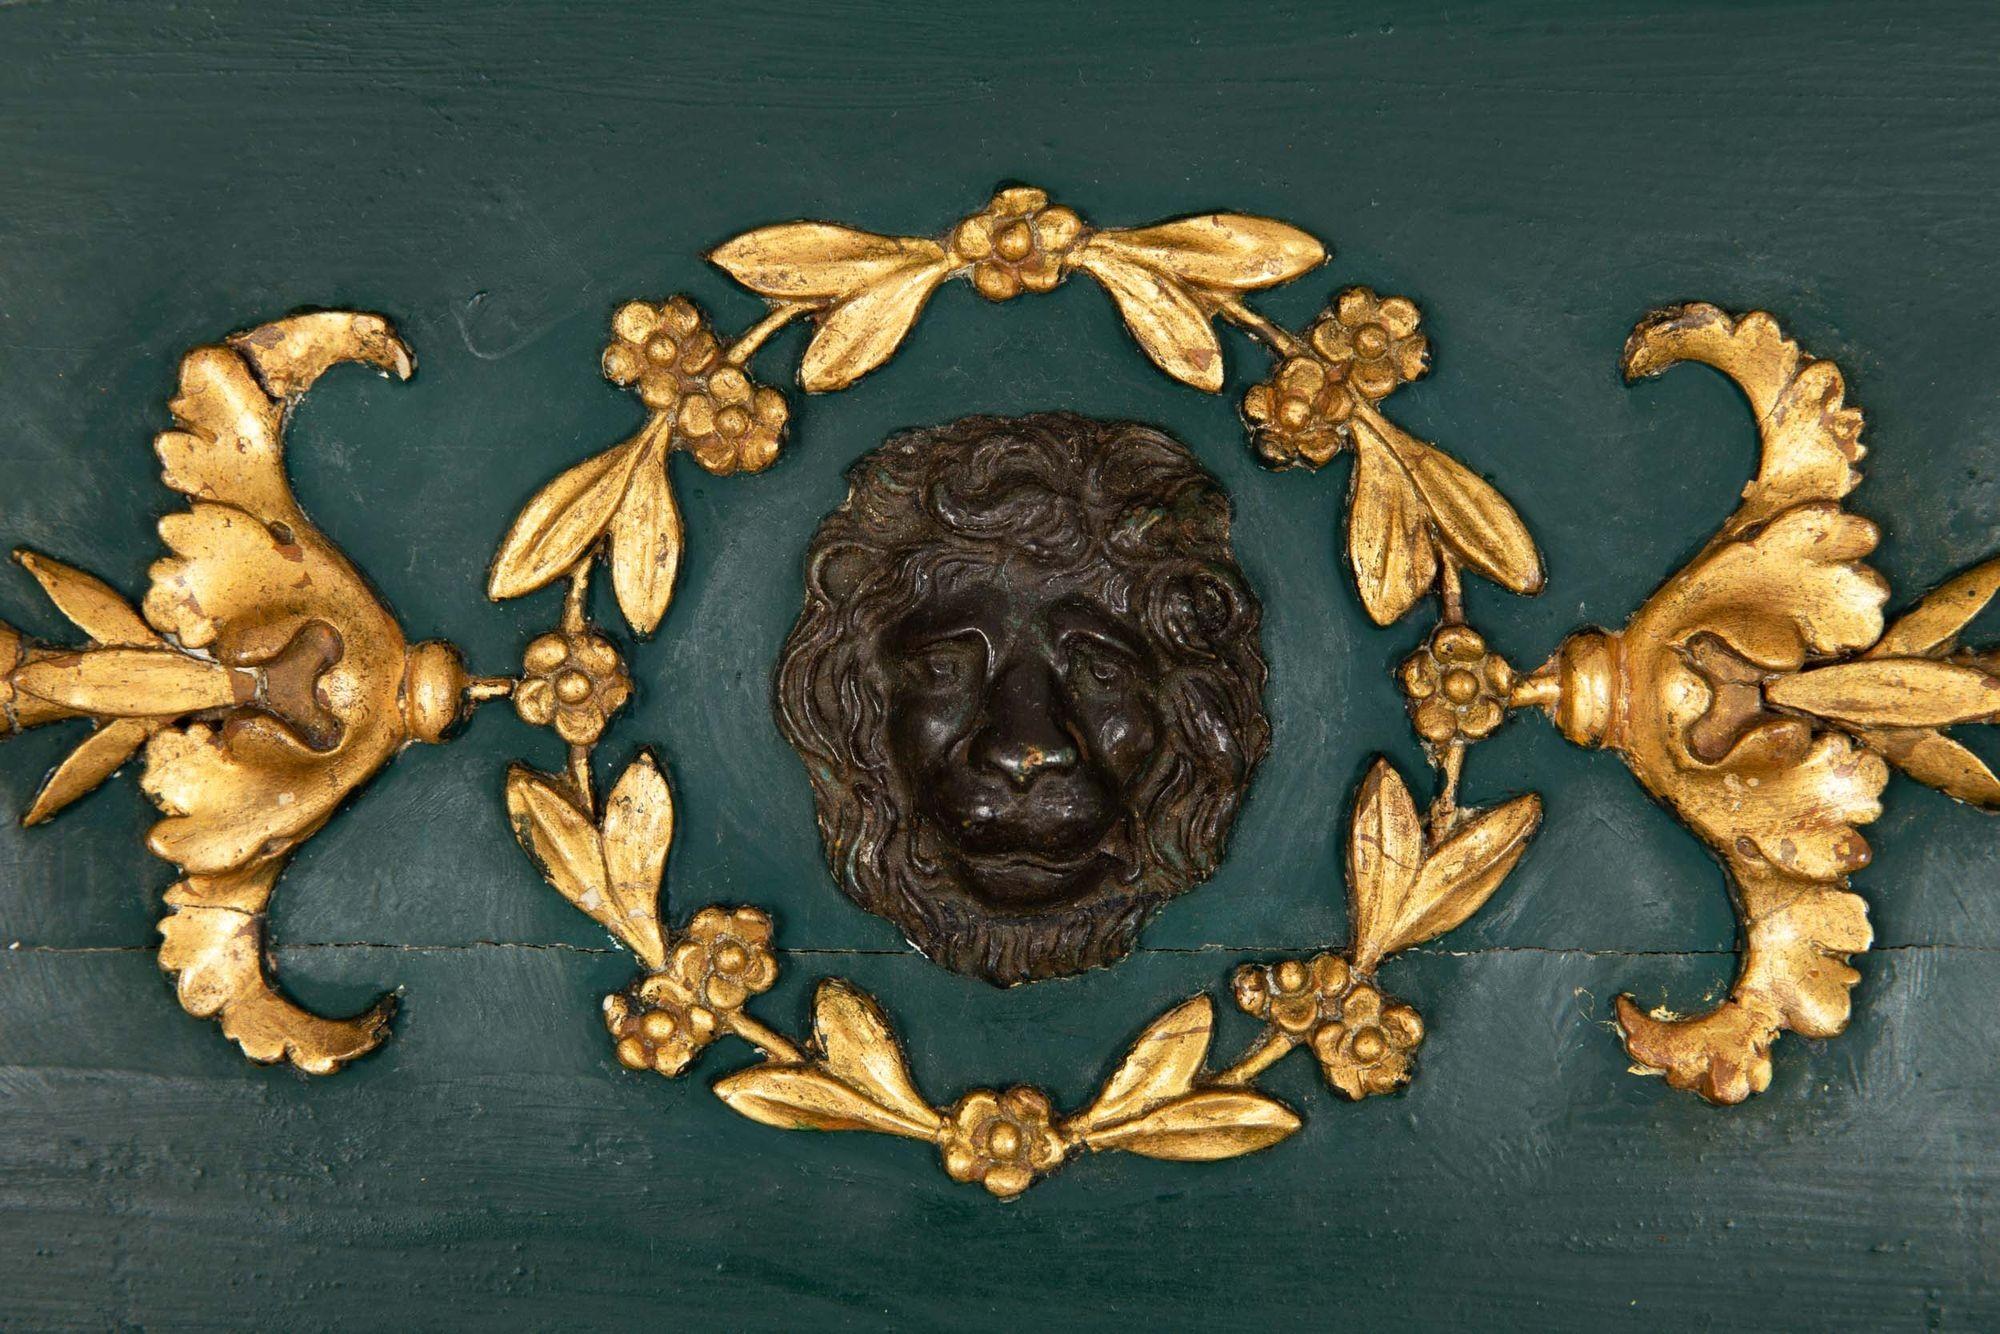 19th Century Regency Period Gilded Pier Mirror with Lion’s Mask, early 19th century For Sale